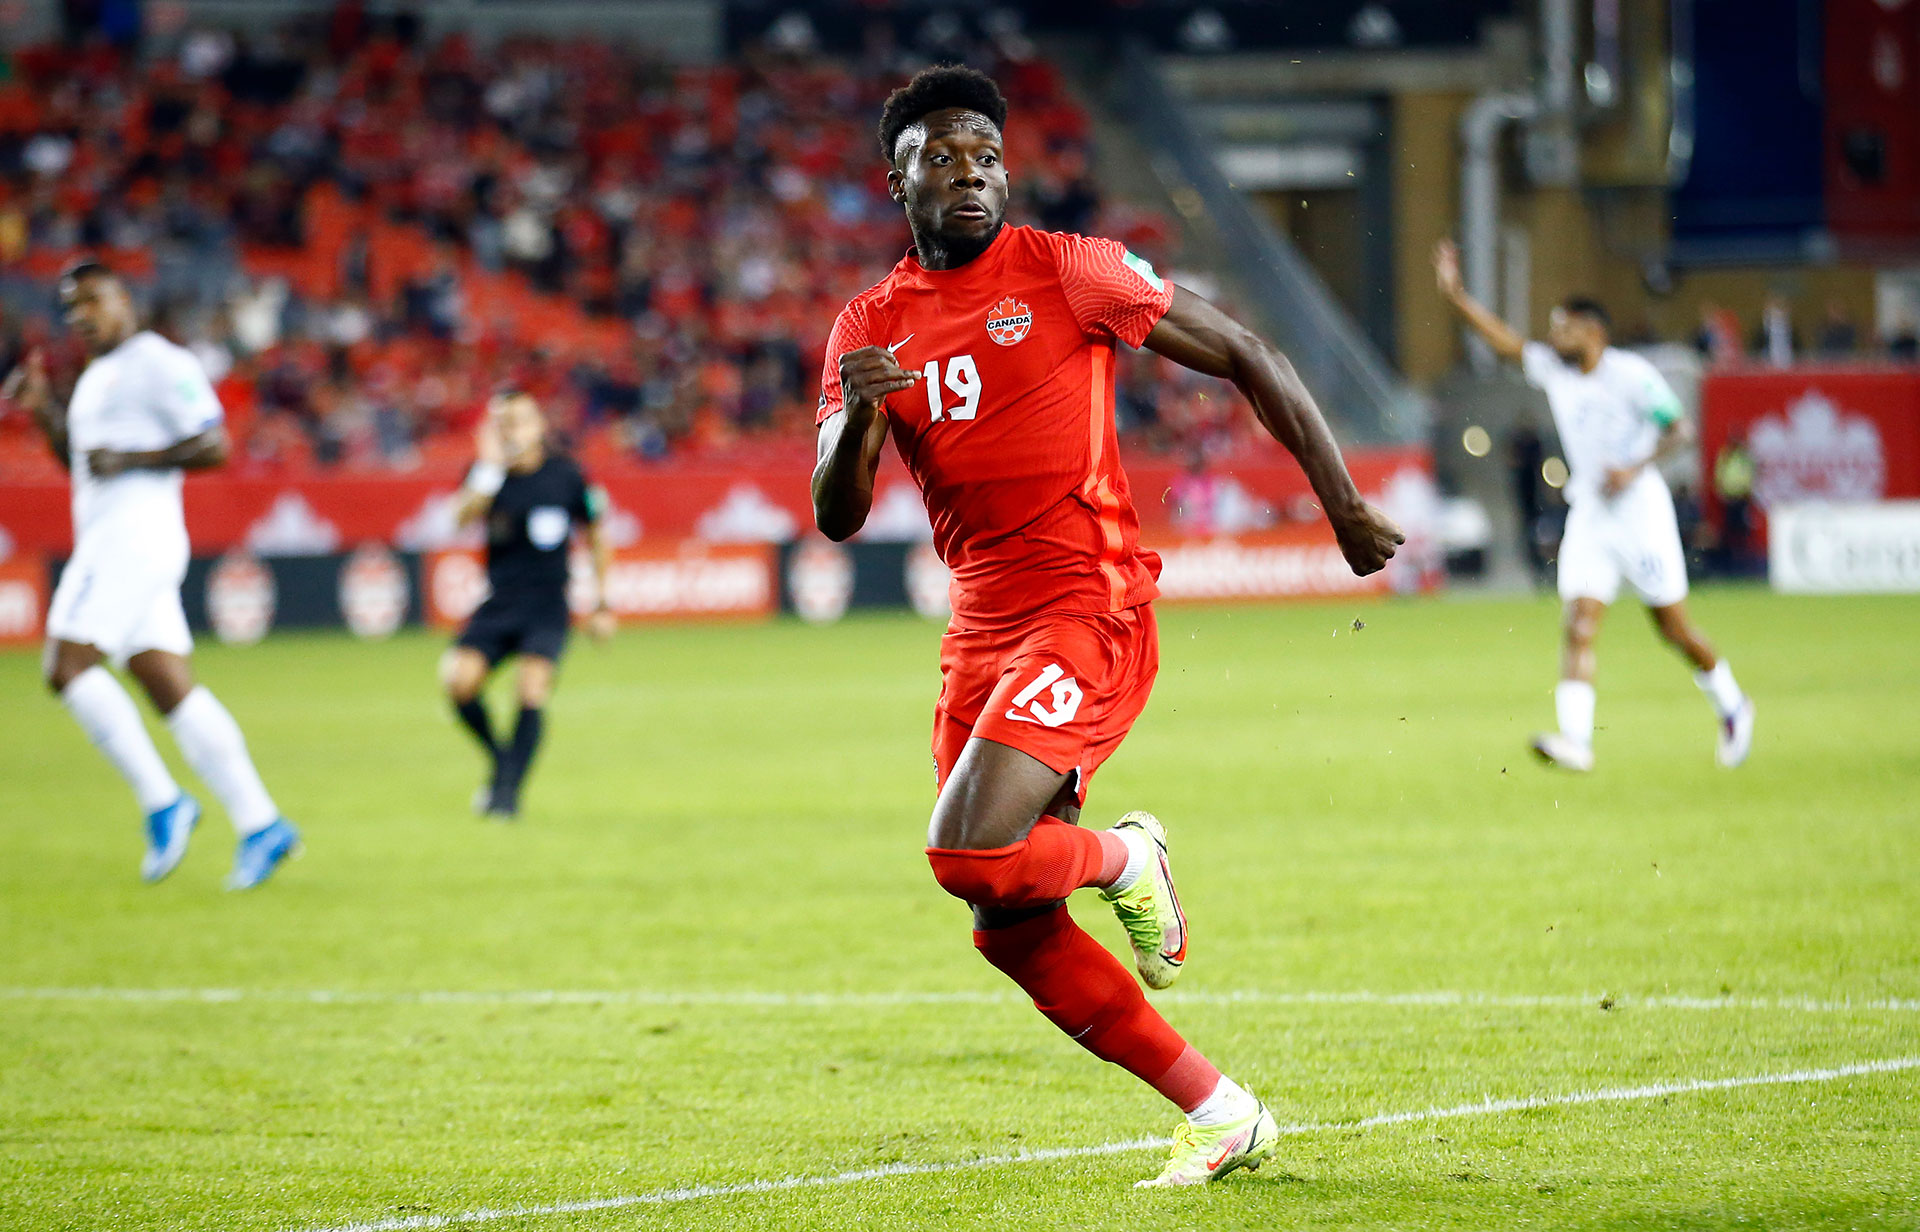 Alphonso Davies #19 of Canada chases the ball during a 2022 World Cup Qualifying